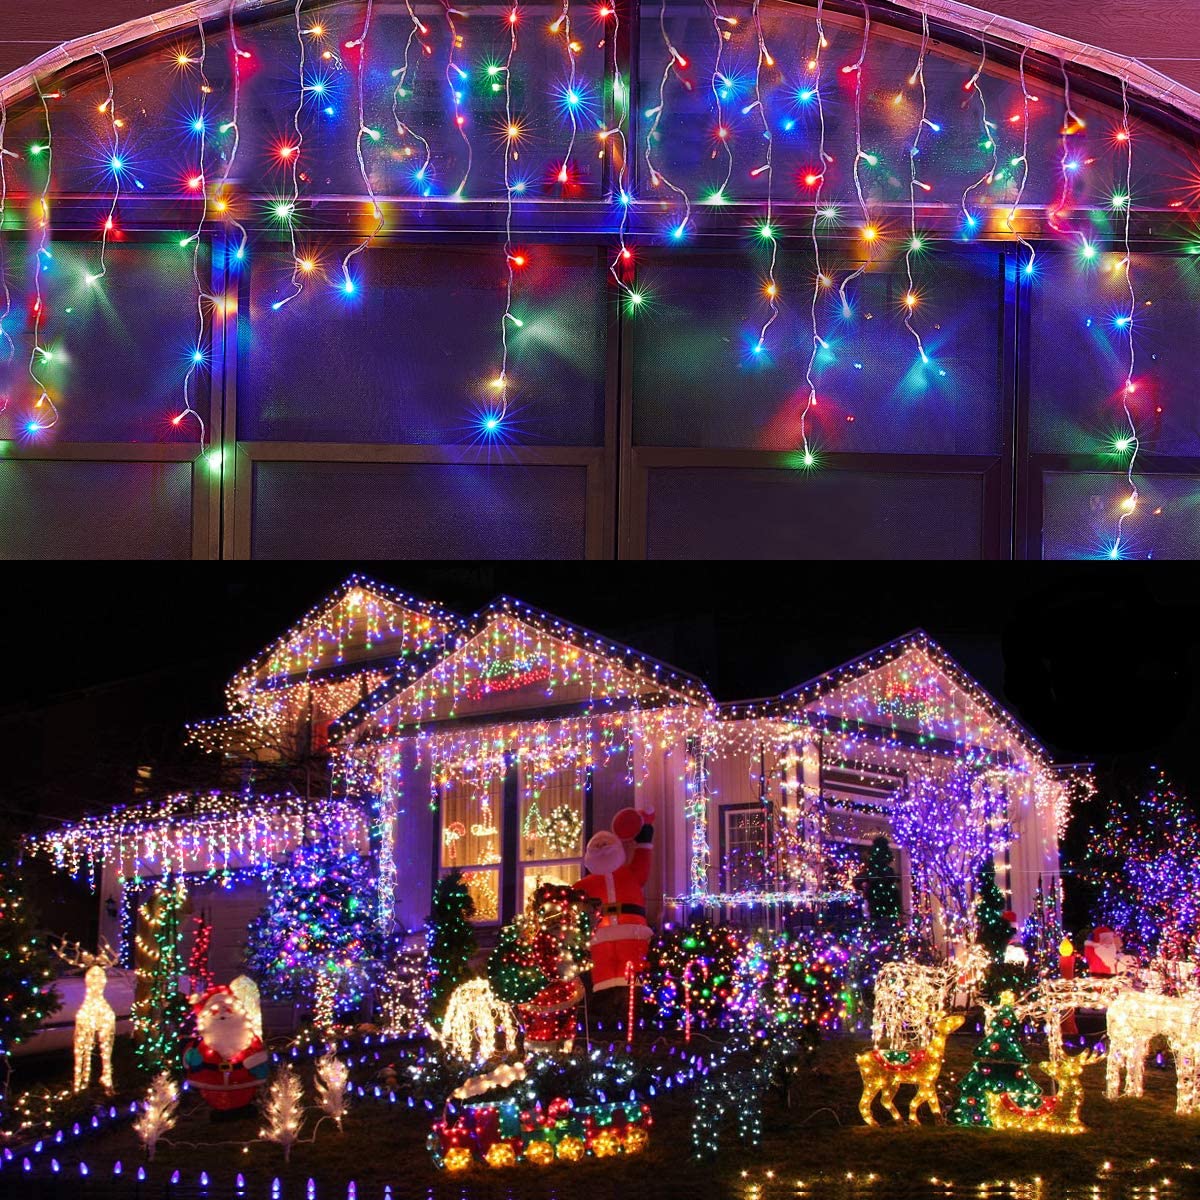 Christmas Decorations For Home Outdoor LED Curtain Icicle String Light Street Garland On The House Winter 220V 5m Droop 0.6-0.8m RGB LED String DailyAlertDeals RGB 3.5m 96 leds EU plug  Steady on